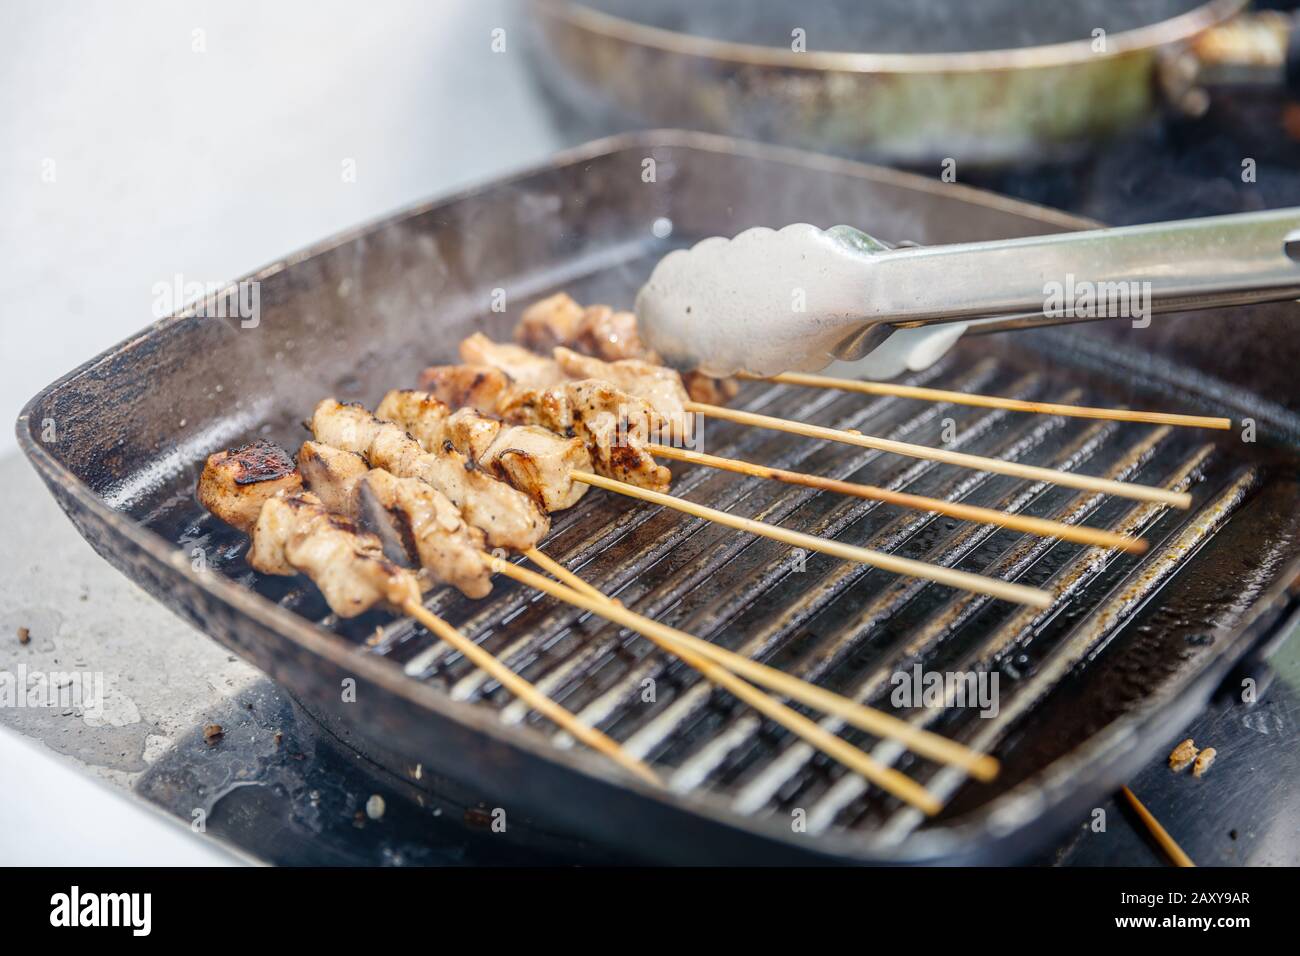 Sate ayam - grilled chicken meat on wooden skewers cooked on a cast fry pan. Indonesian cuisine. Stock Photo